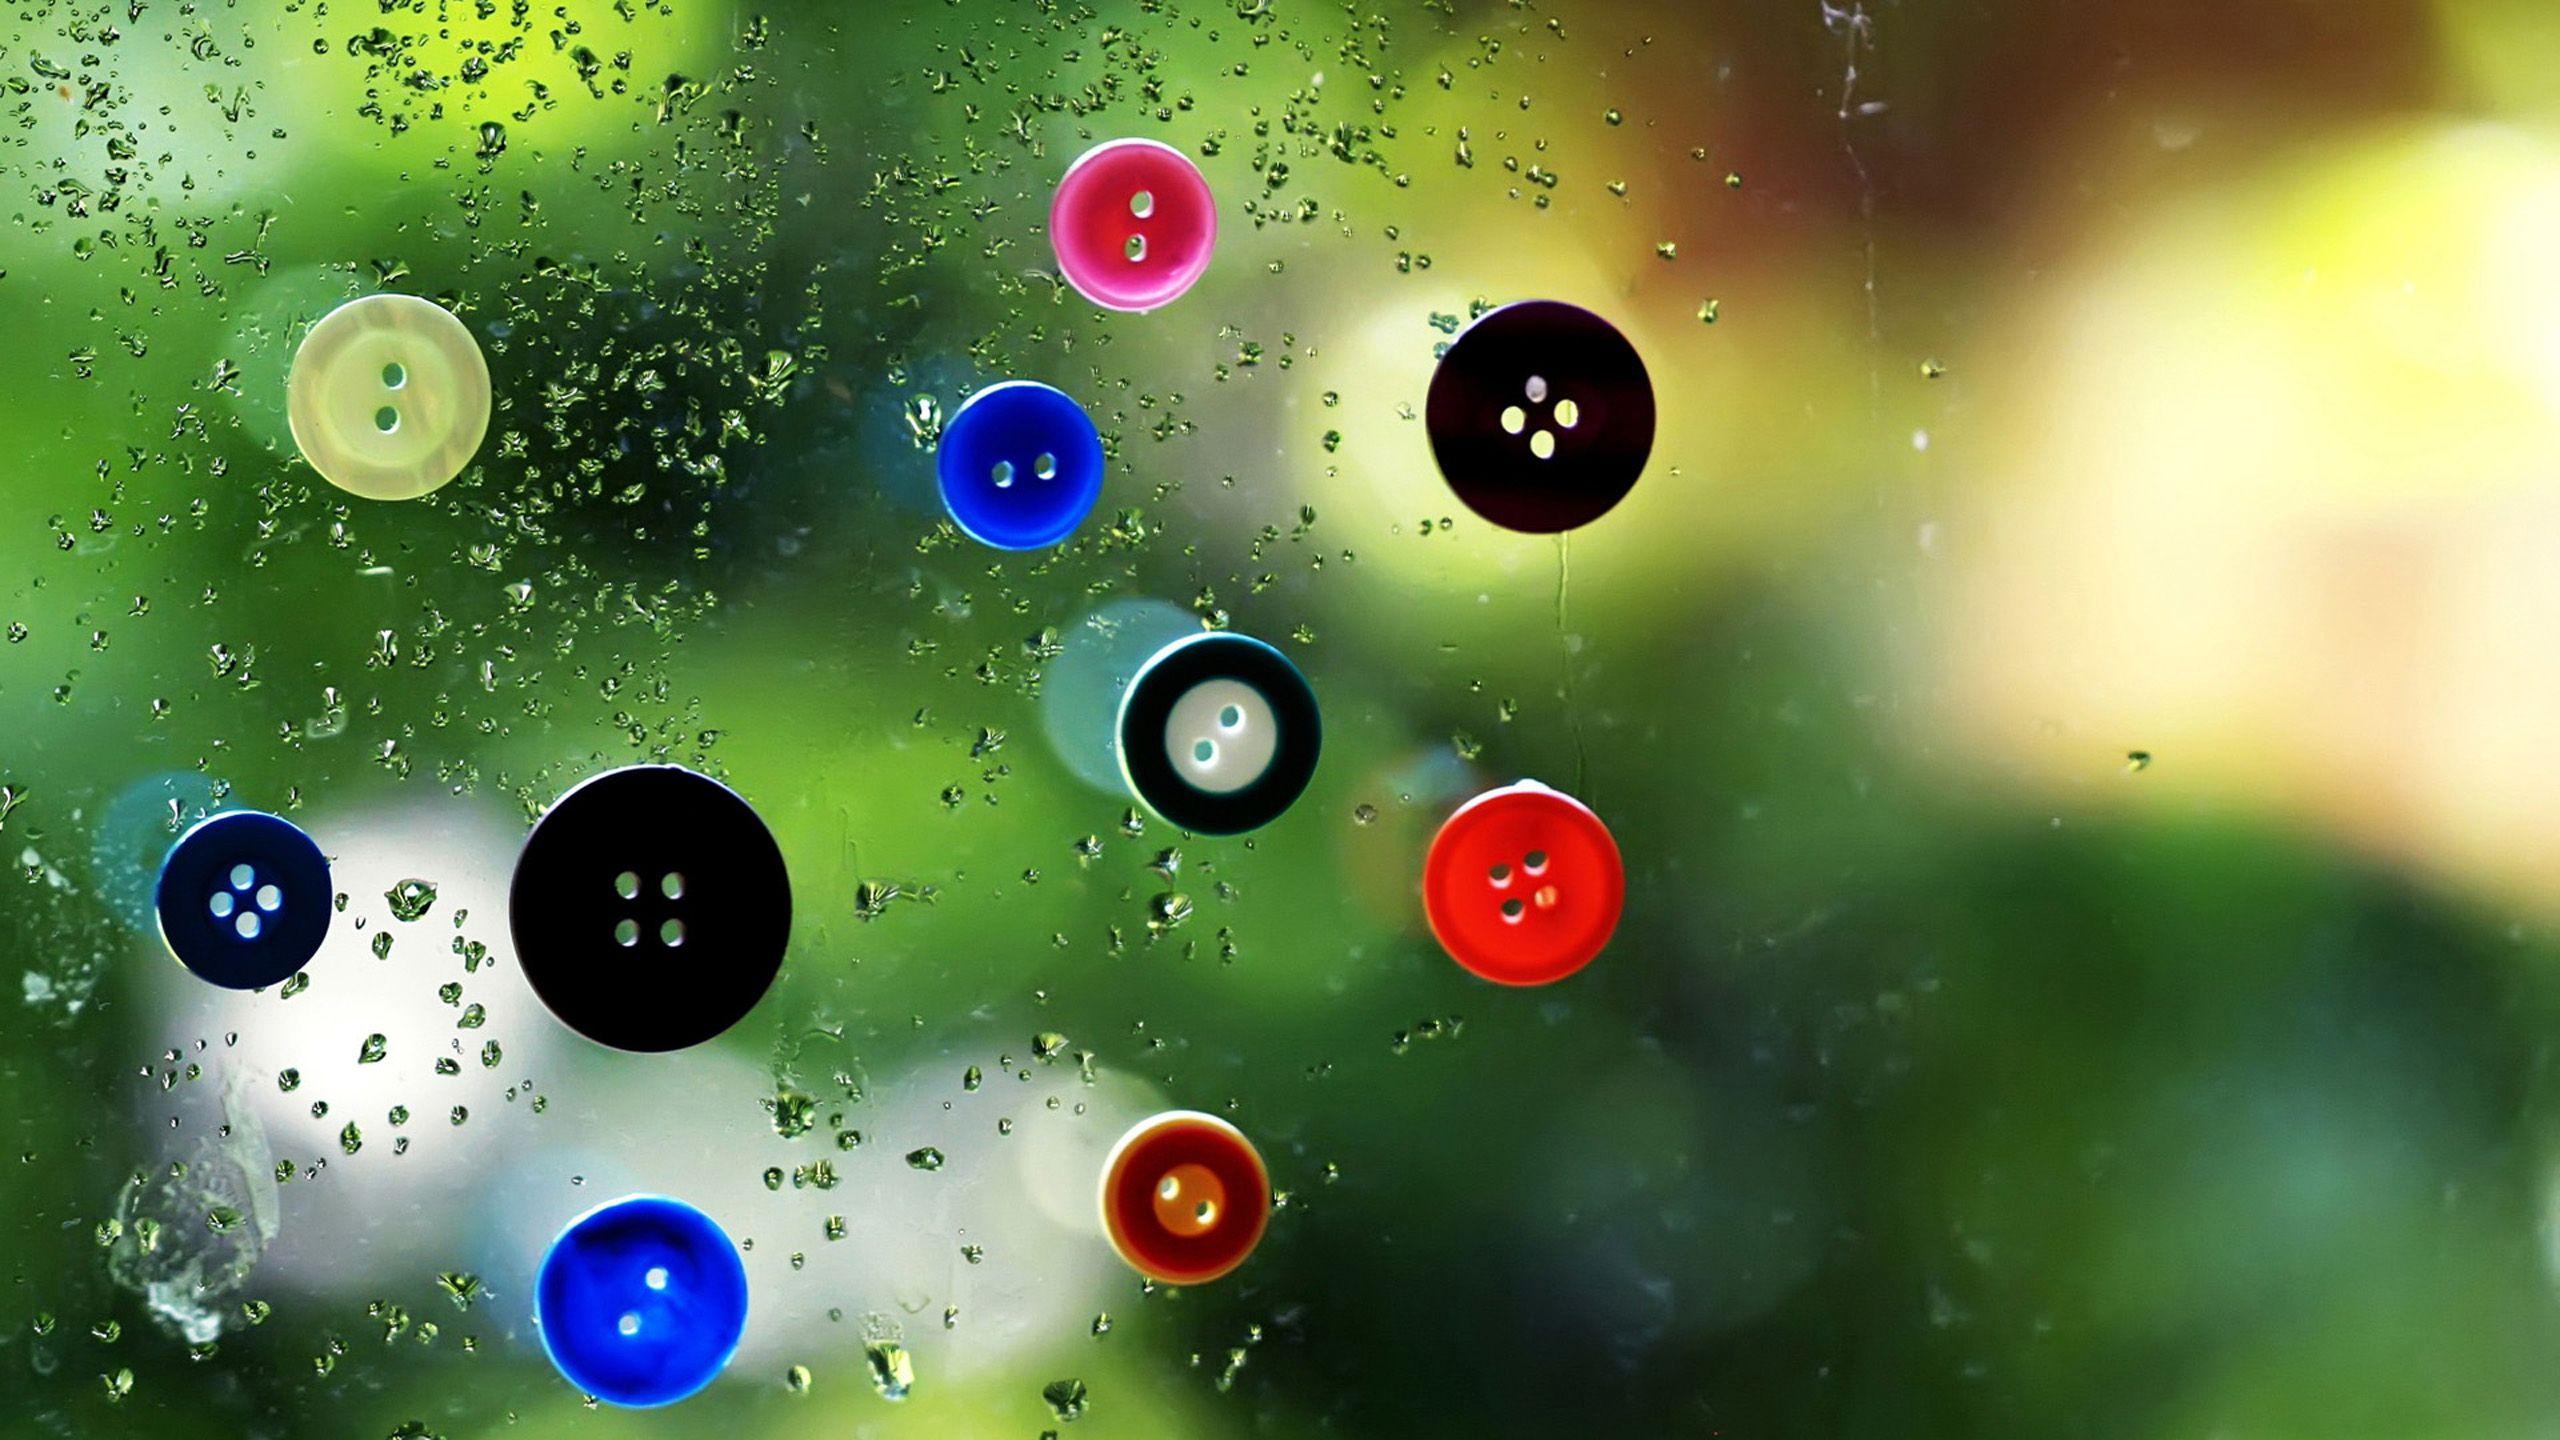 Amazing 43 Wallpaper of Button, Top Button Collection